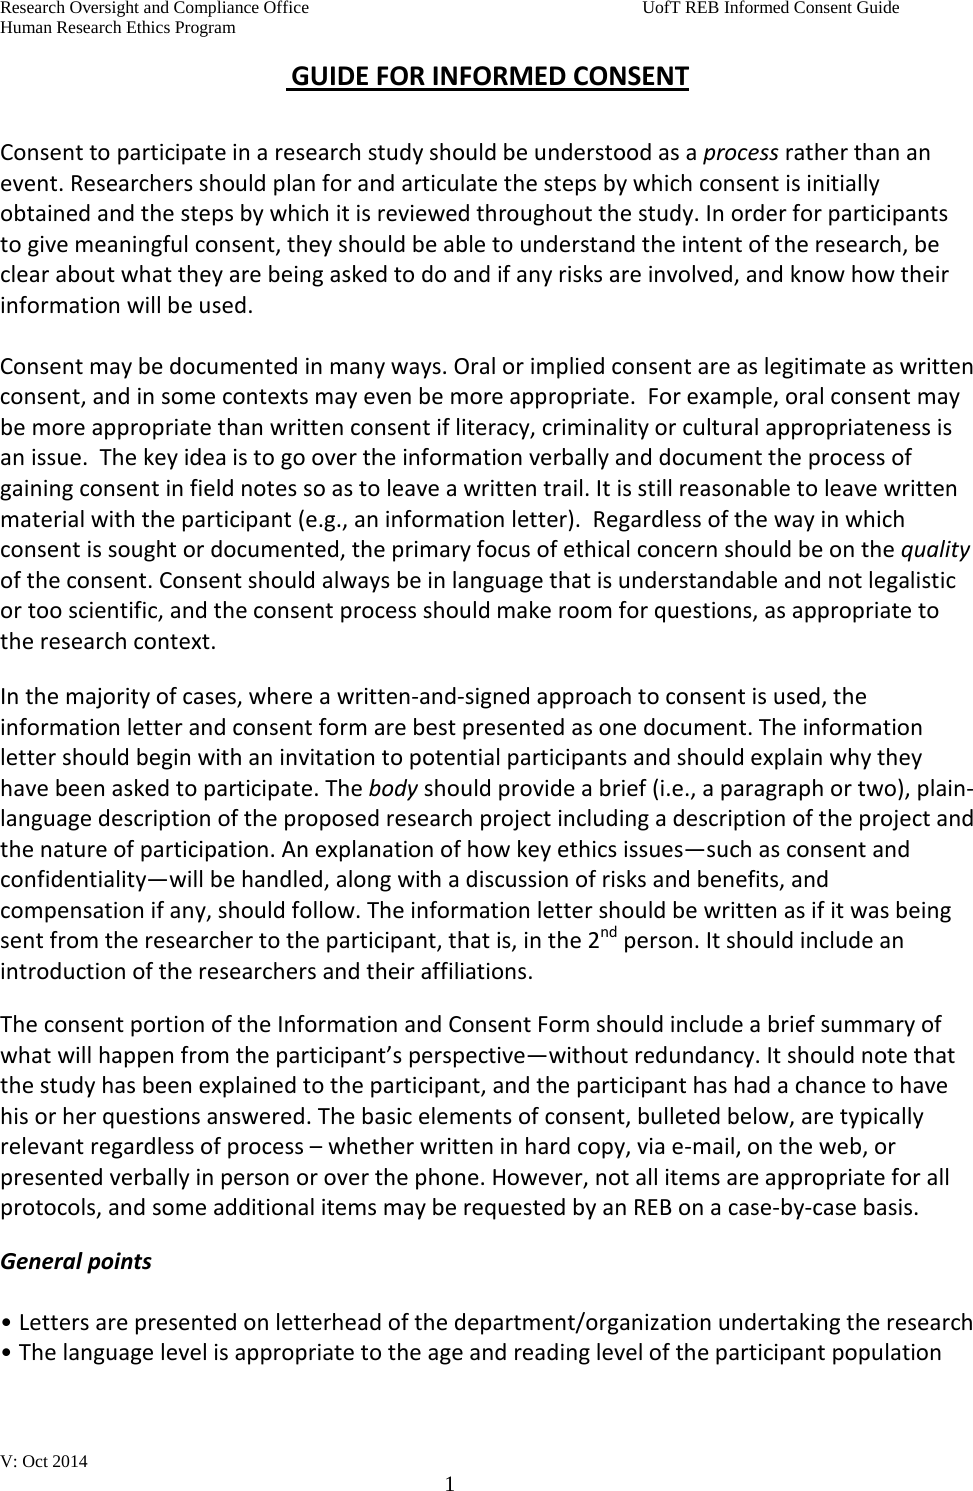 Page 1 of 3 - GUIDE FOR INFORMED CONSENT GUIDE-FOR-INFORMED-CONSENT-V-Oct-2014